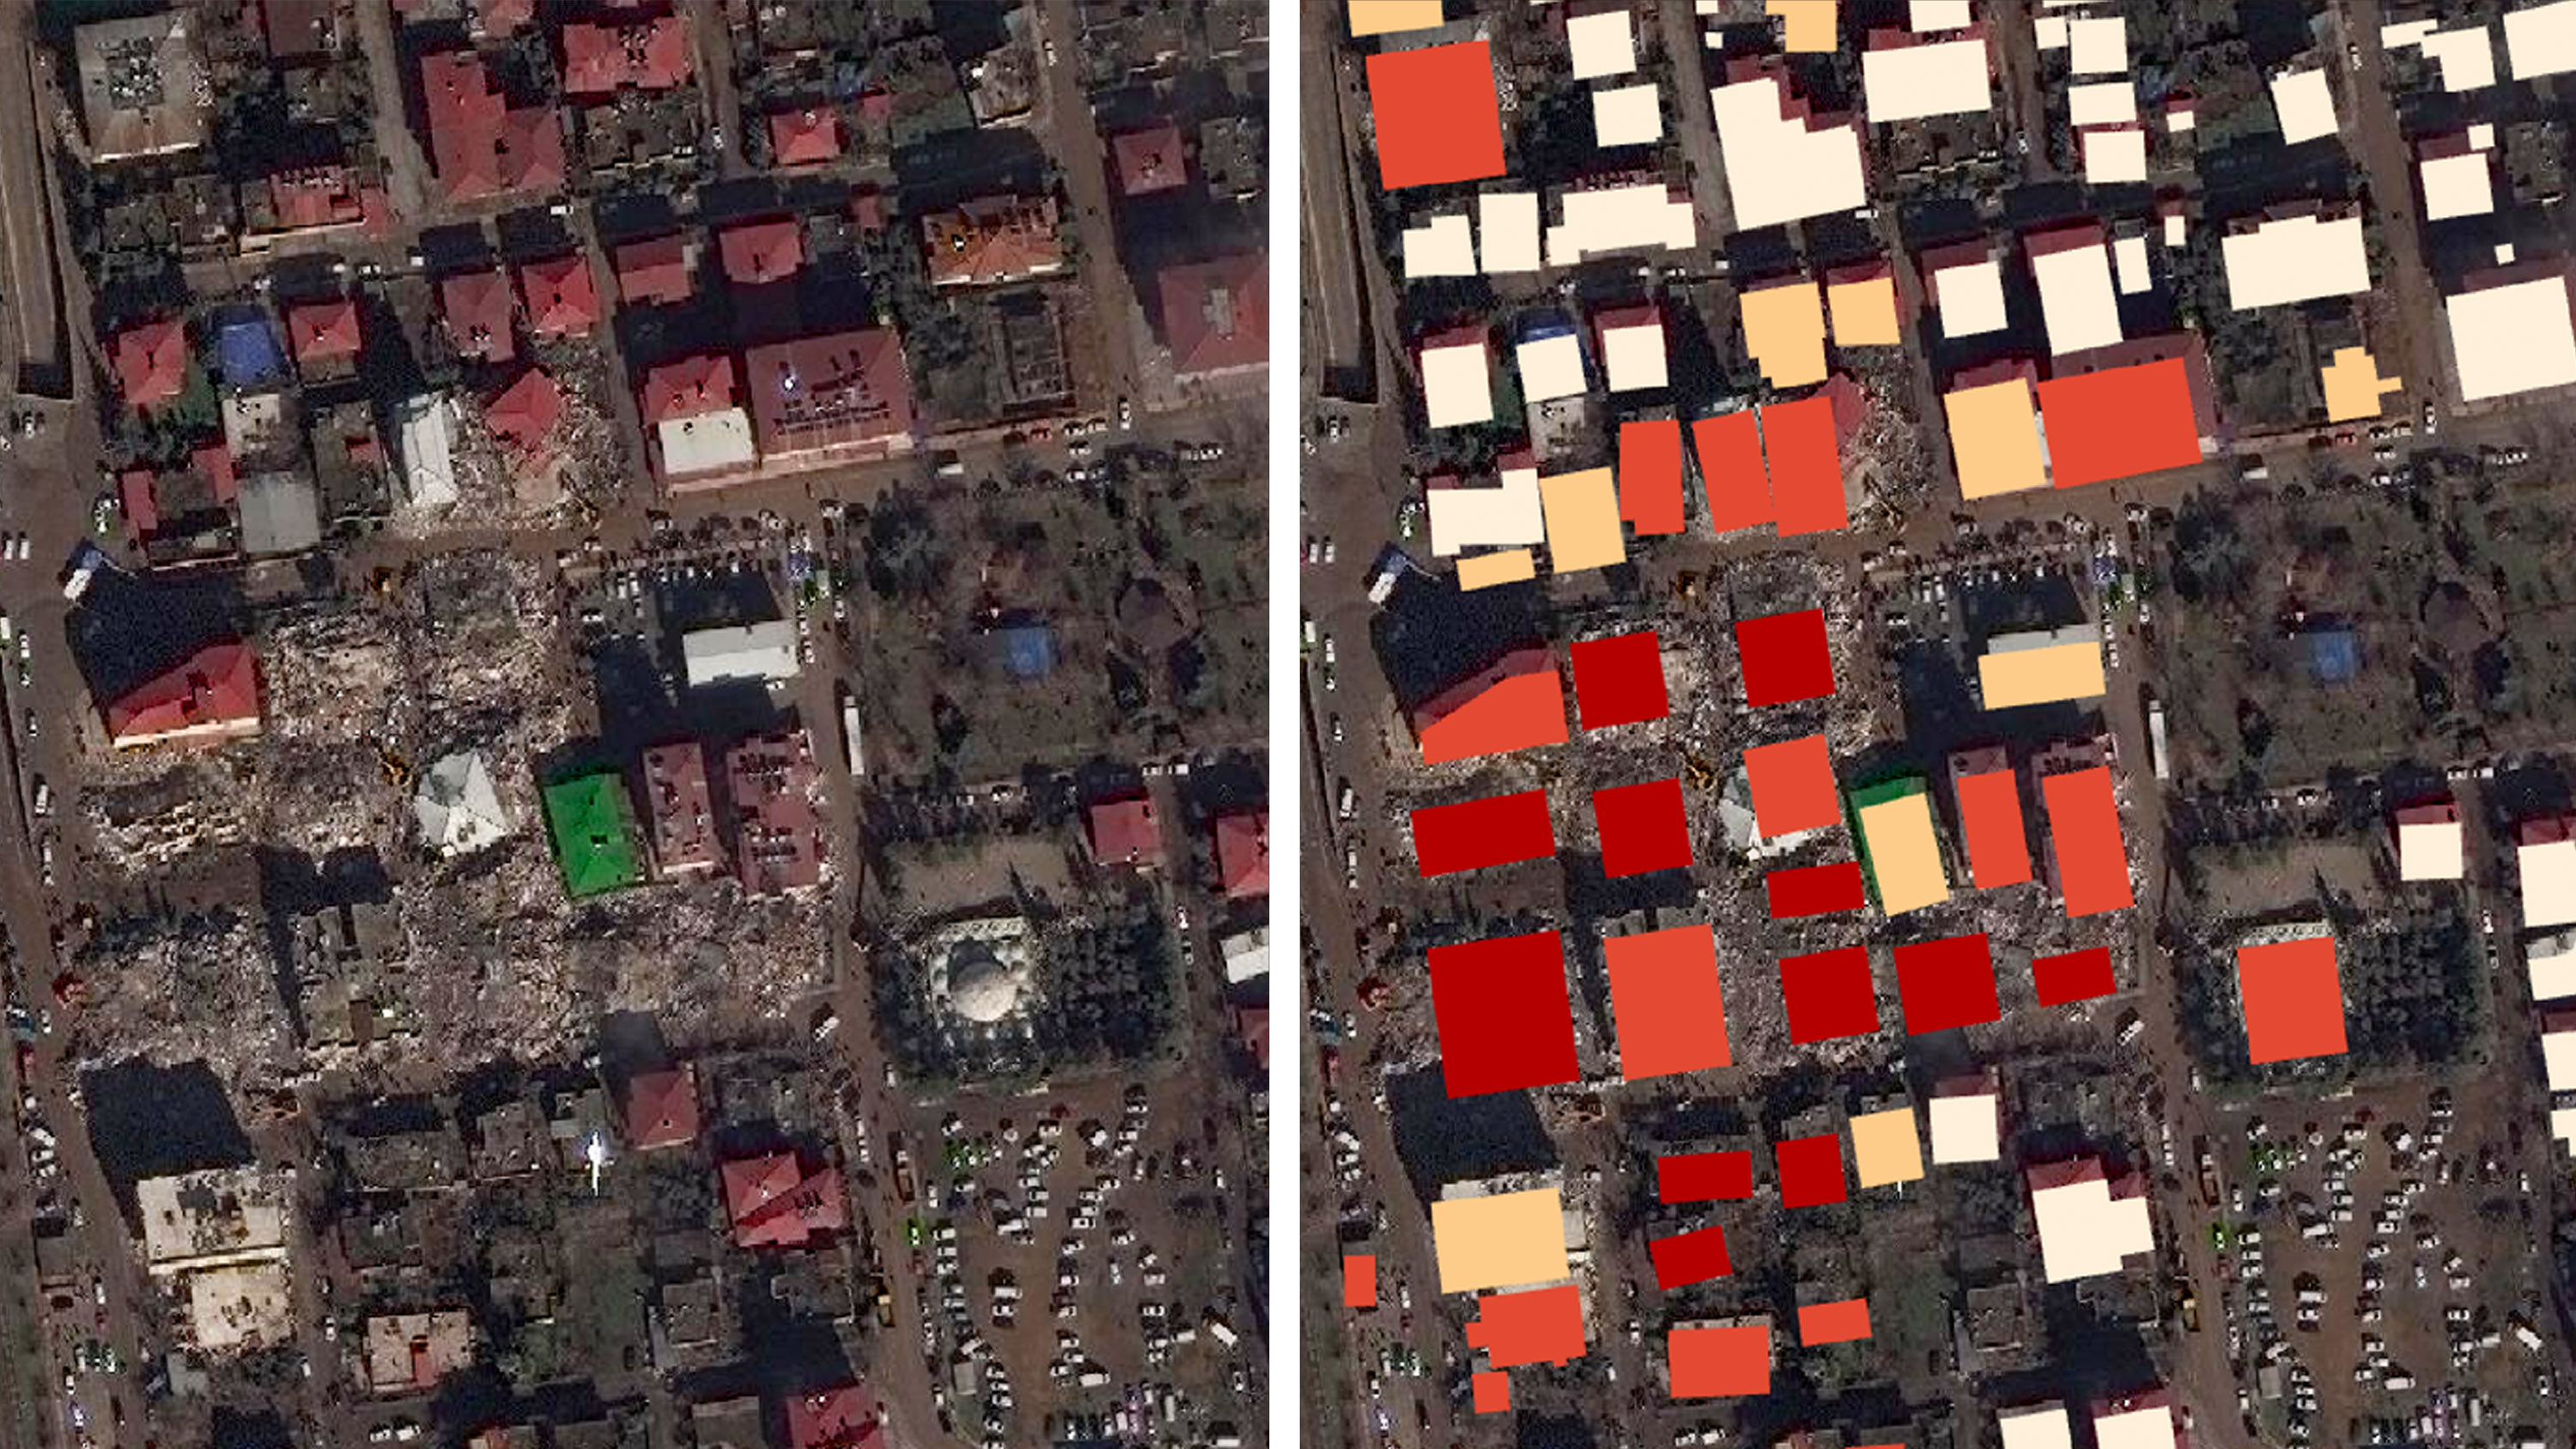 left image of satellite view of earthquake damage compared to an image of the same area with rectangles drawn to show structures